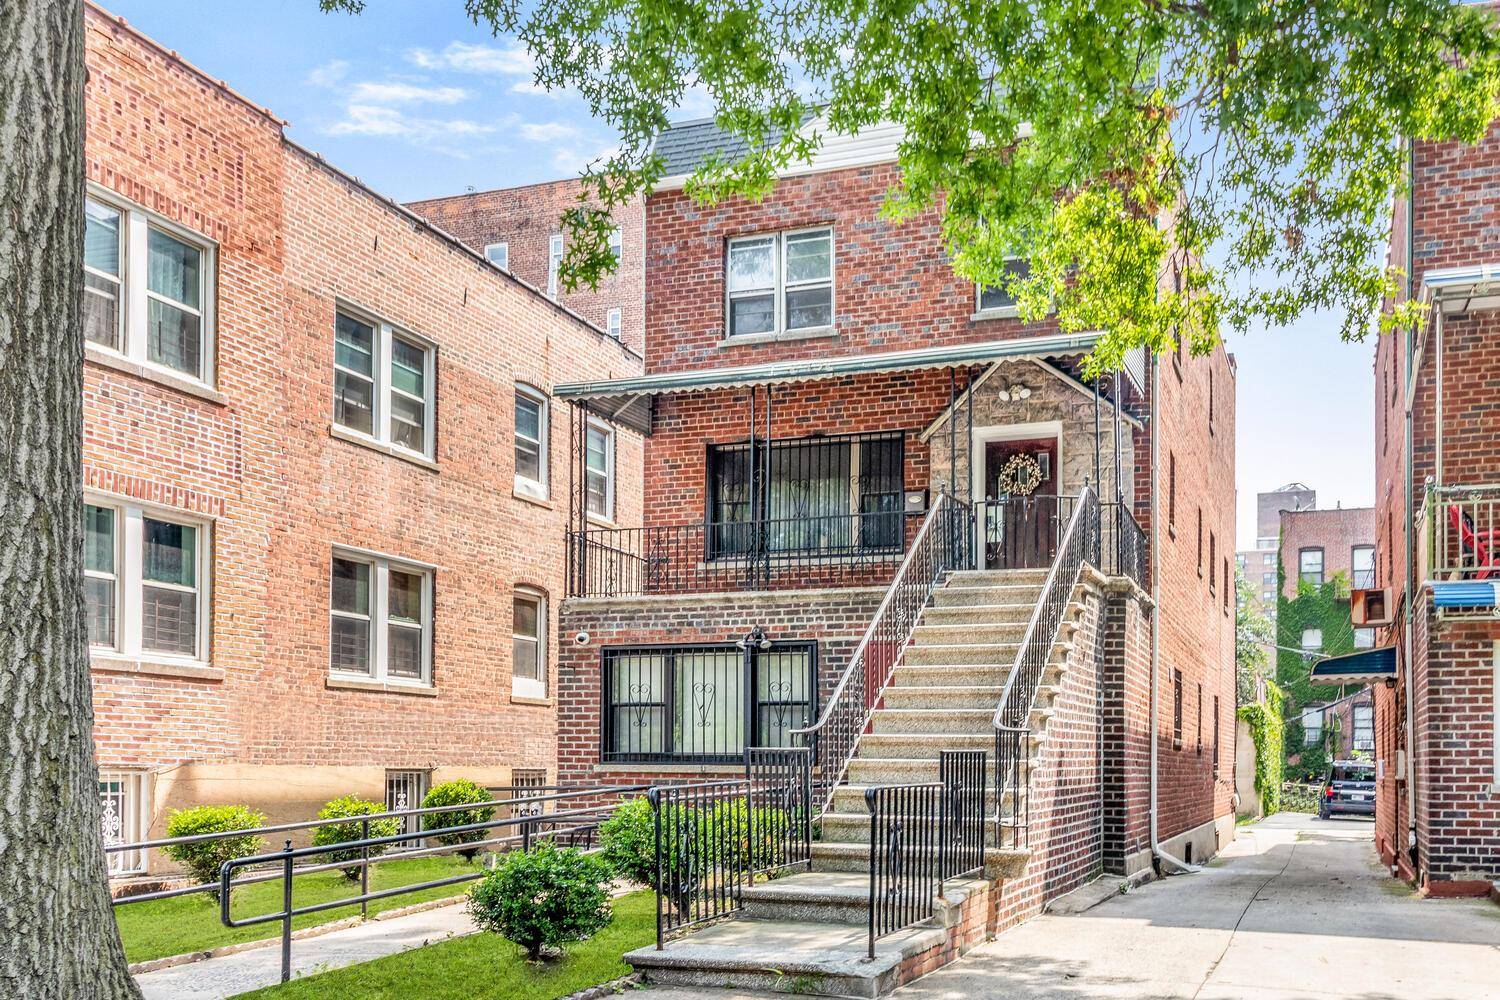 Incredible Investment opportunity in the Heart of Allerton Pelham Parkway North East Section of the Bronx.